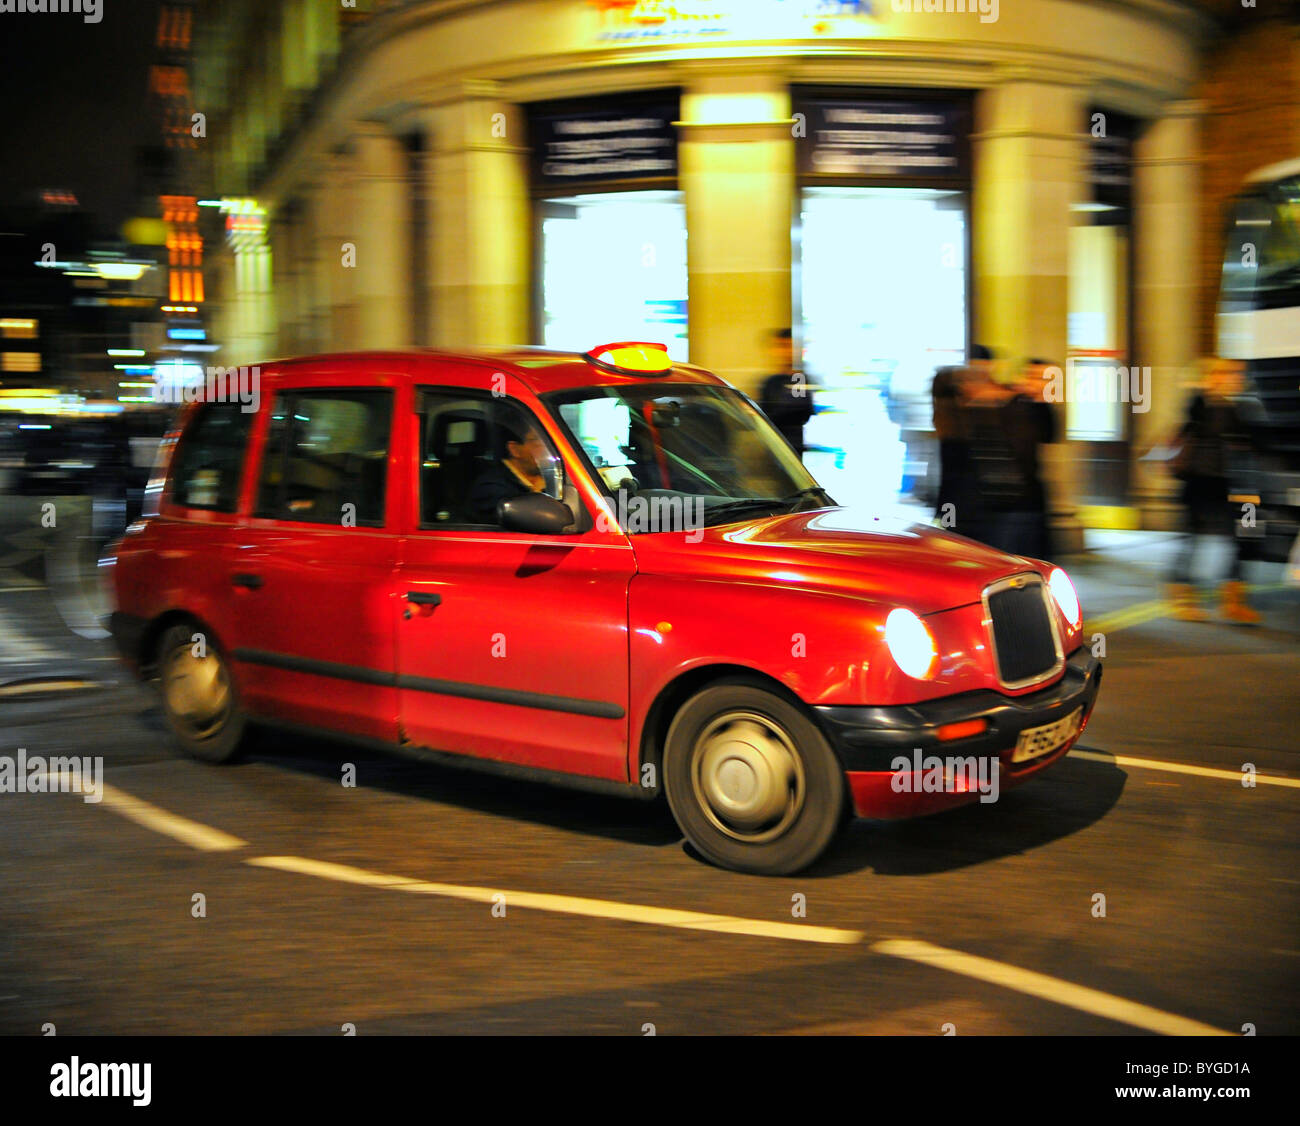 Red Taxi Cab in motion on the streets of London Stock Photo